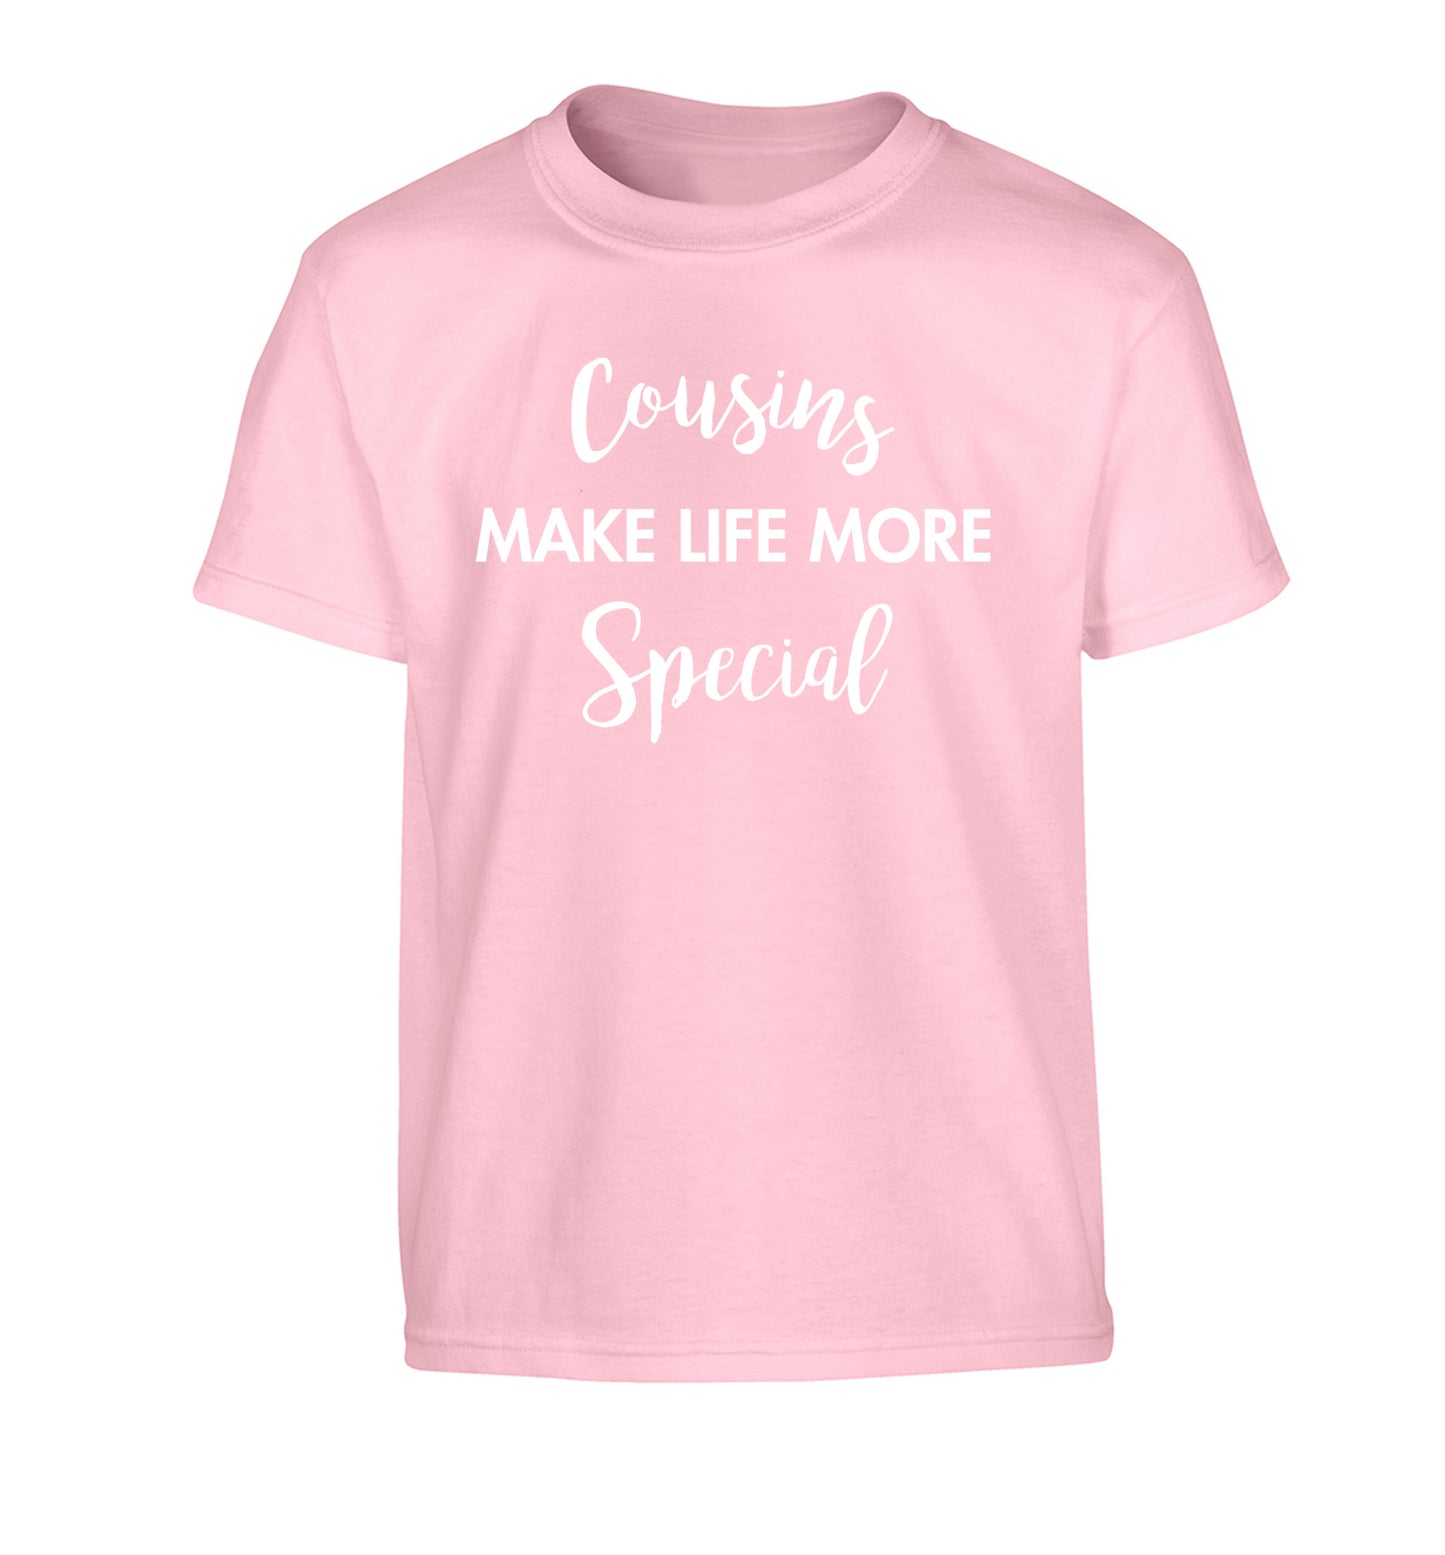 Cousins make life more special Children's light pink Tshirt 12-14 Years